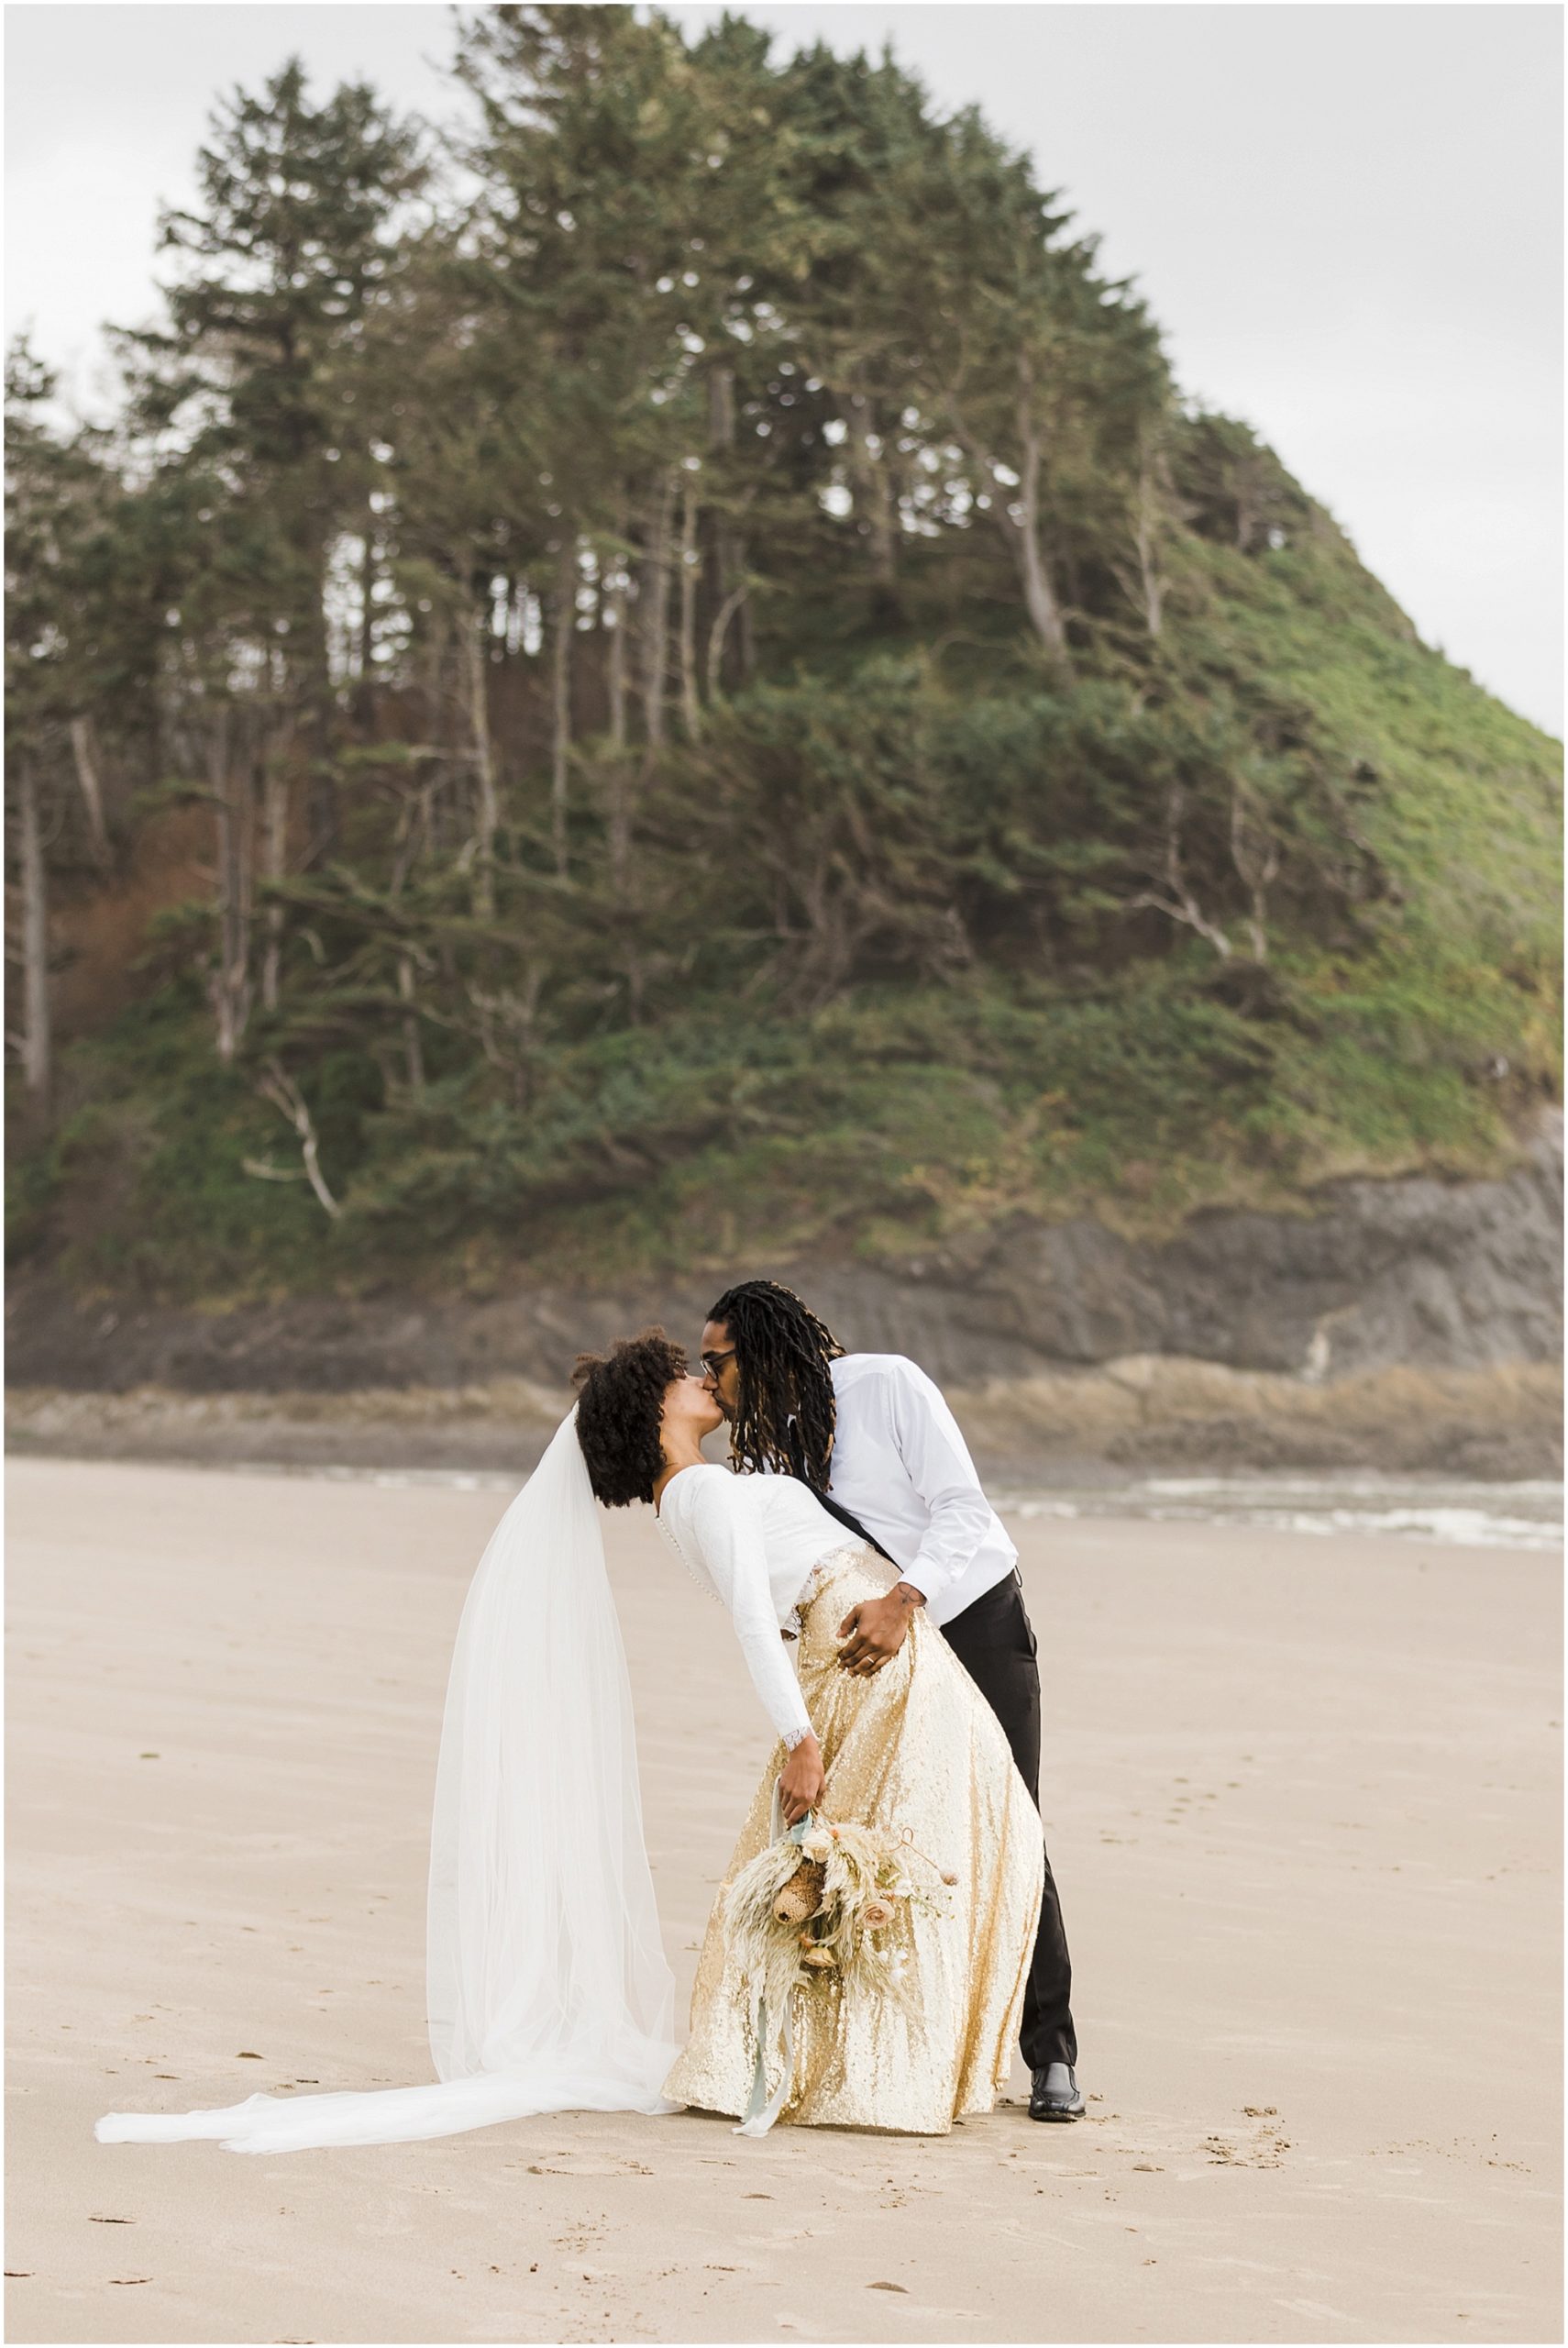 A groom wearing a white shirt and black pants dips his bride wearing a gold sequined skirt back for a kiss with Proposal Rock in the background. They married in an intimate ceremony on the Oregon Coast. | Erica Swantek Photography